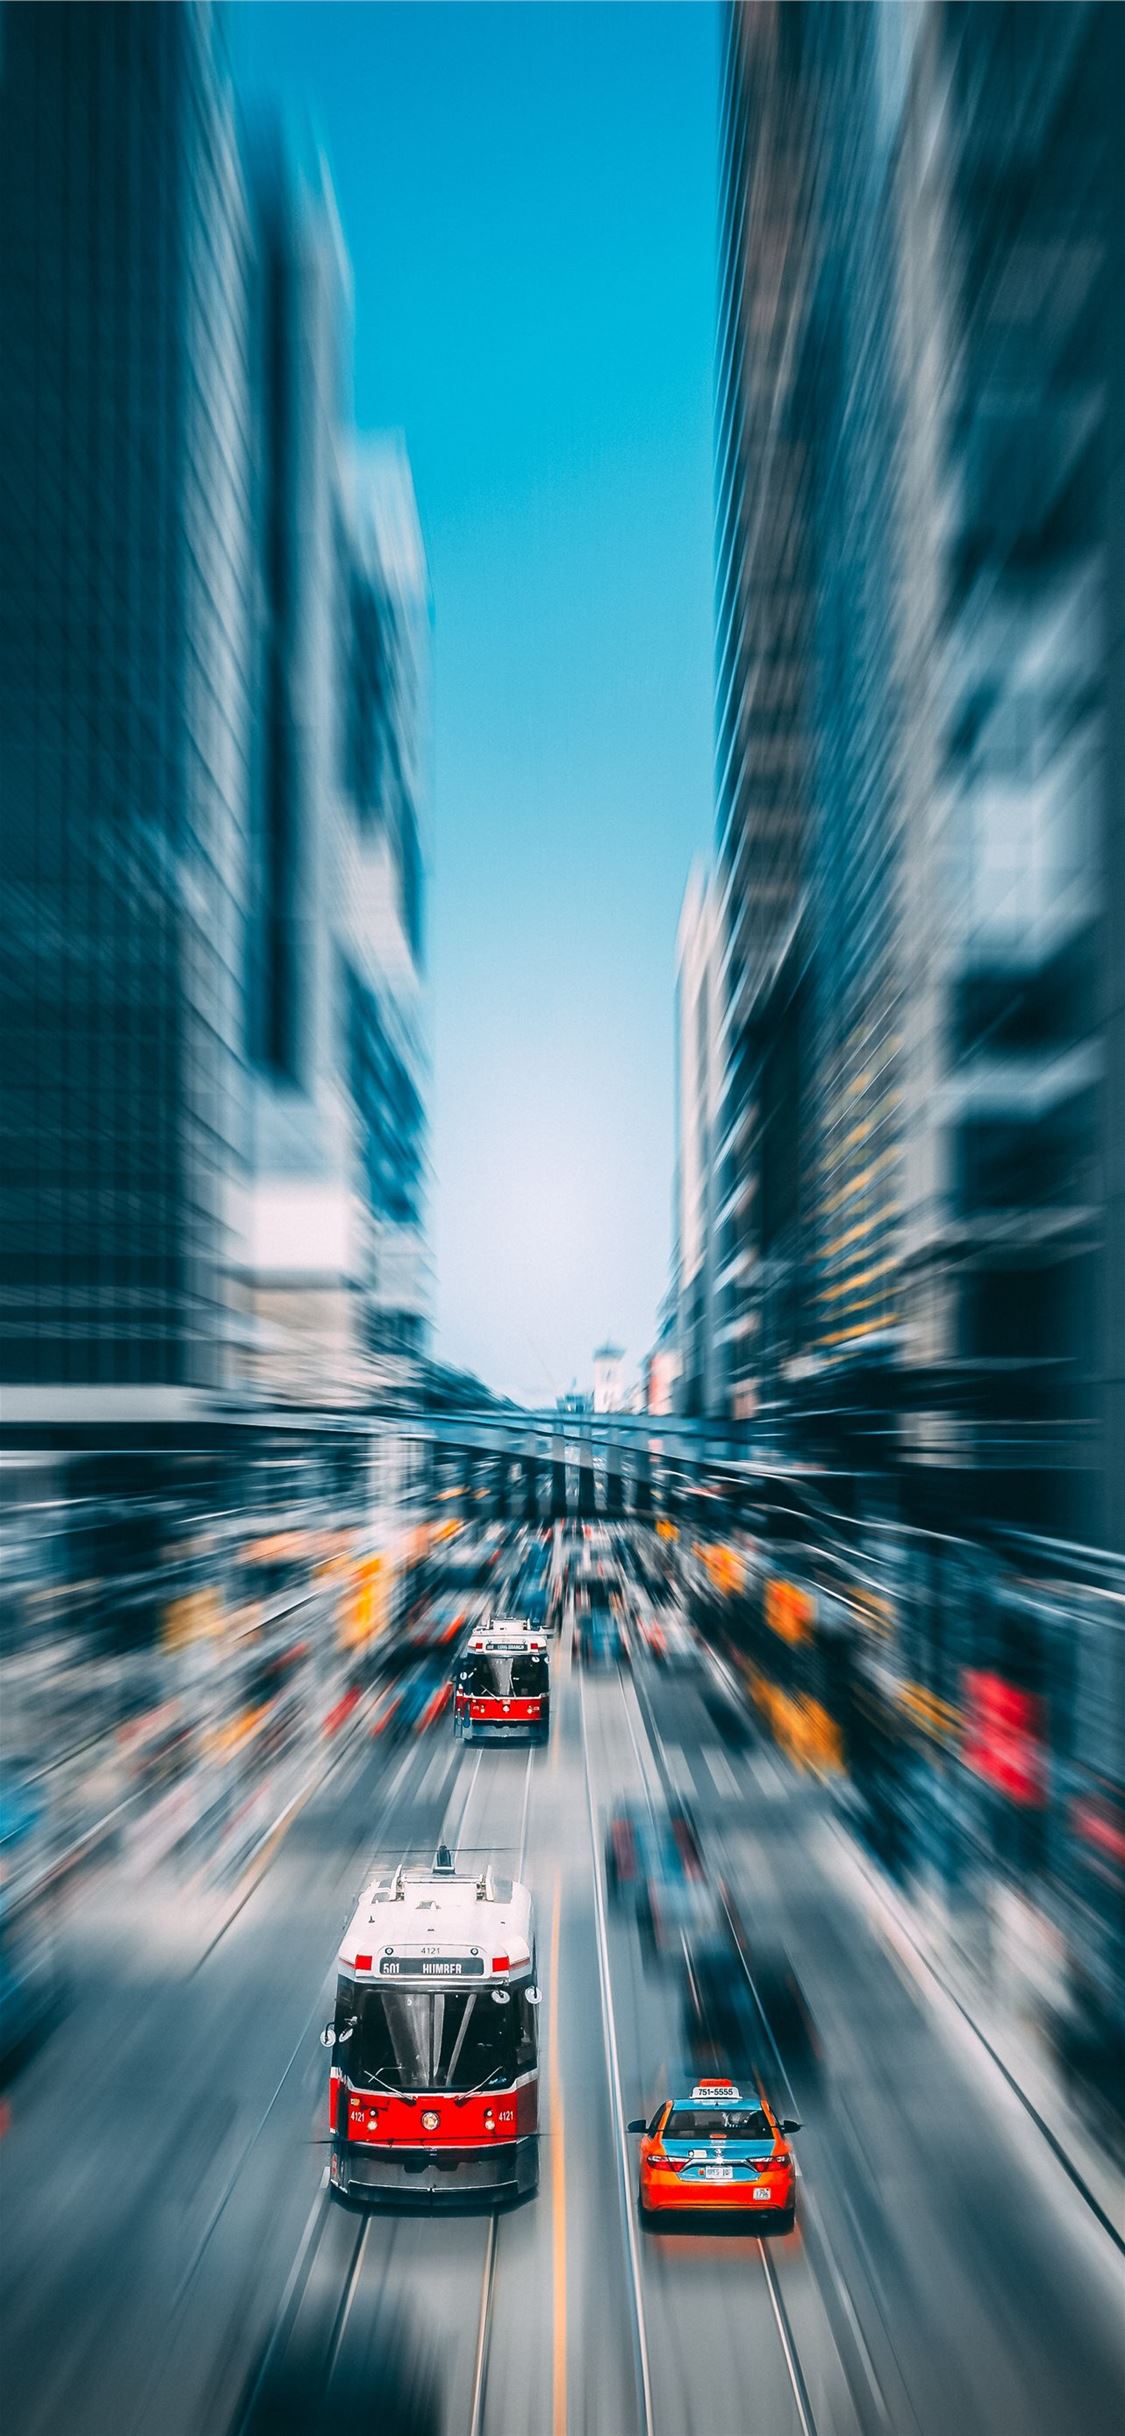 time lapse photography of vehicles in busy road iPhone X wallpaper 